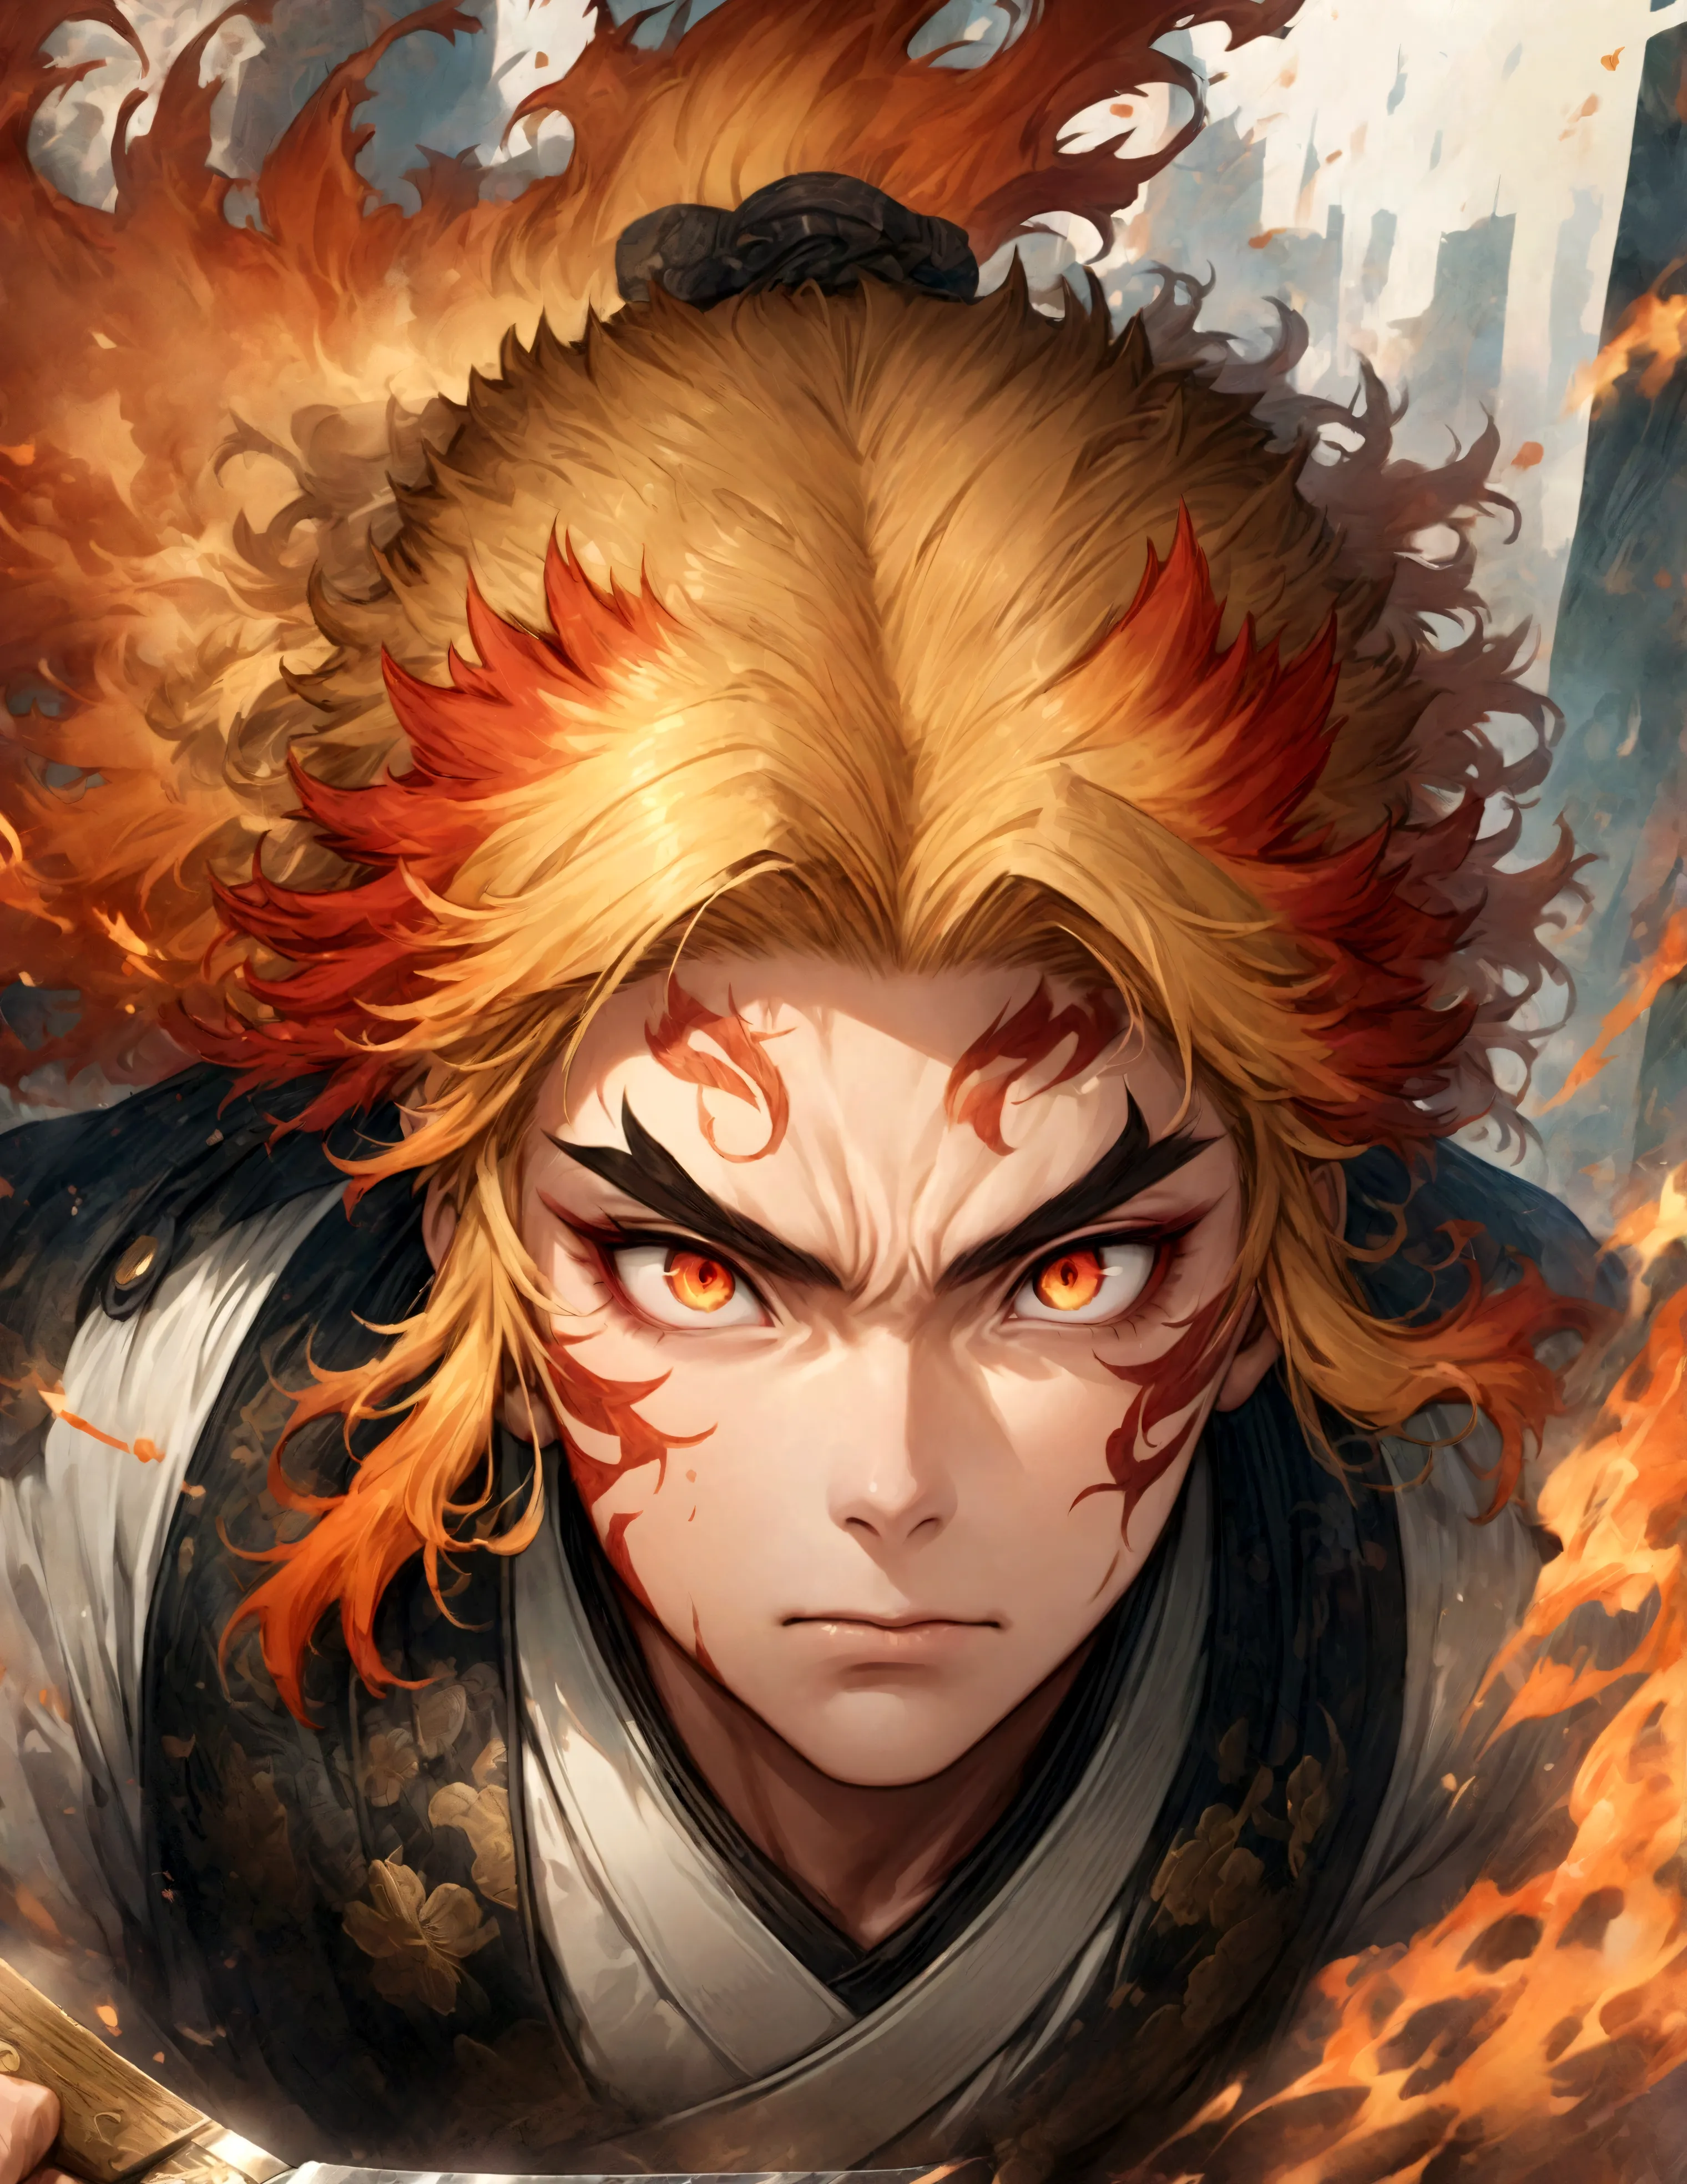 (1 male,Rengoku Kyojuro,Yellow and orange hair),solo,comics『Demon slayer』Characters in,,Battle Style,Inflammation effects,Starin...